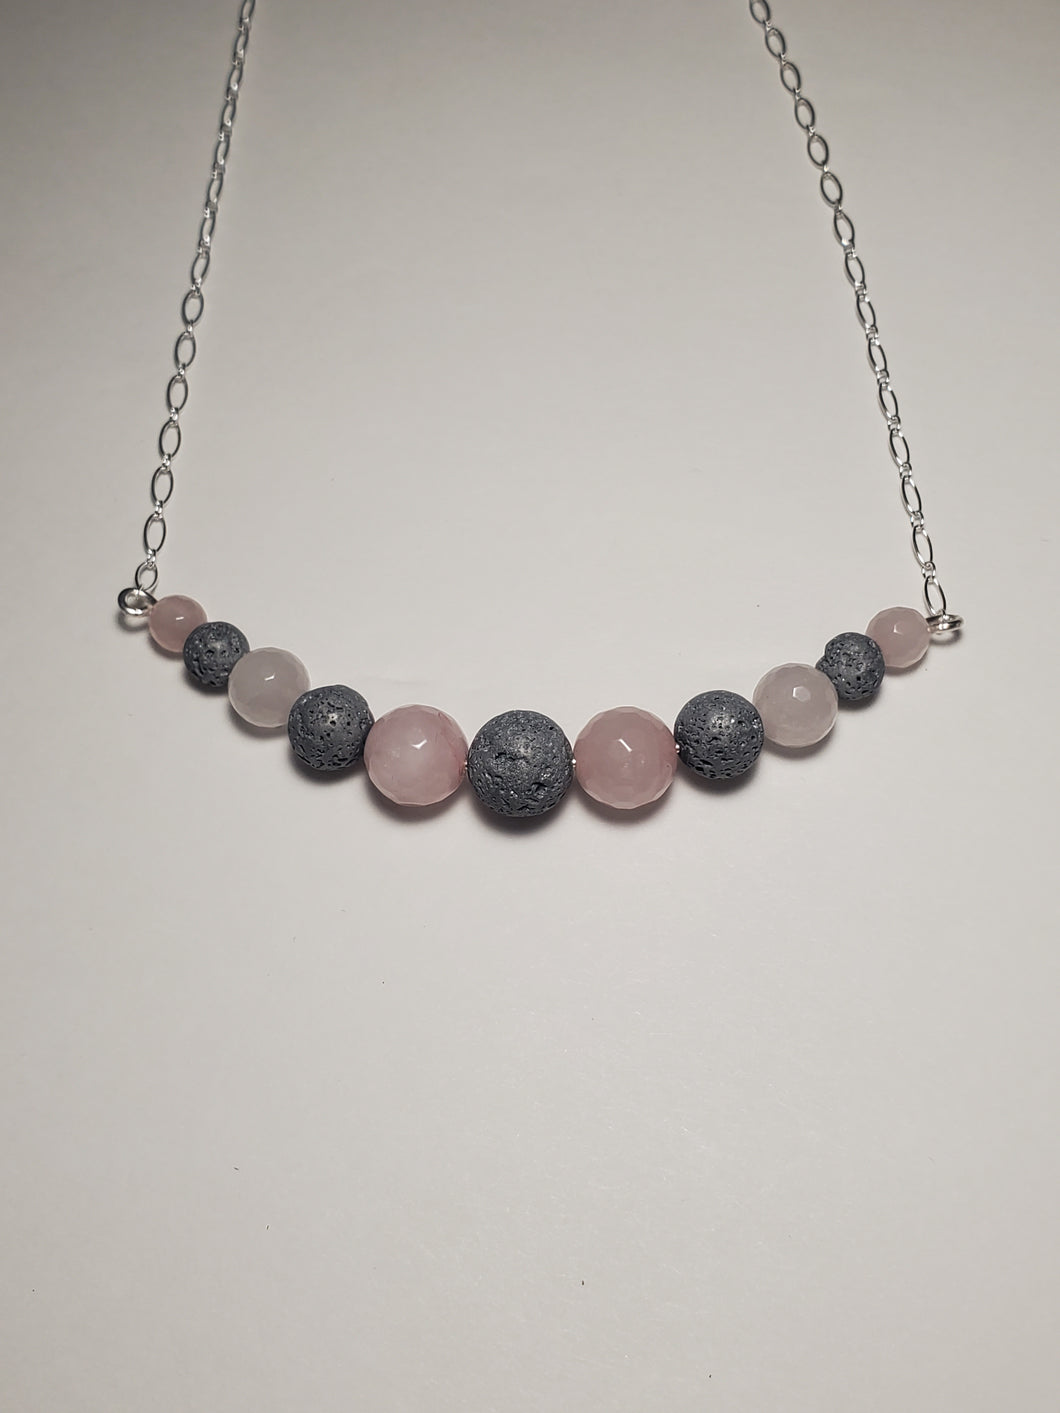 Rose quartz Sterling Silver Healing Chakra Diffuser Necklace